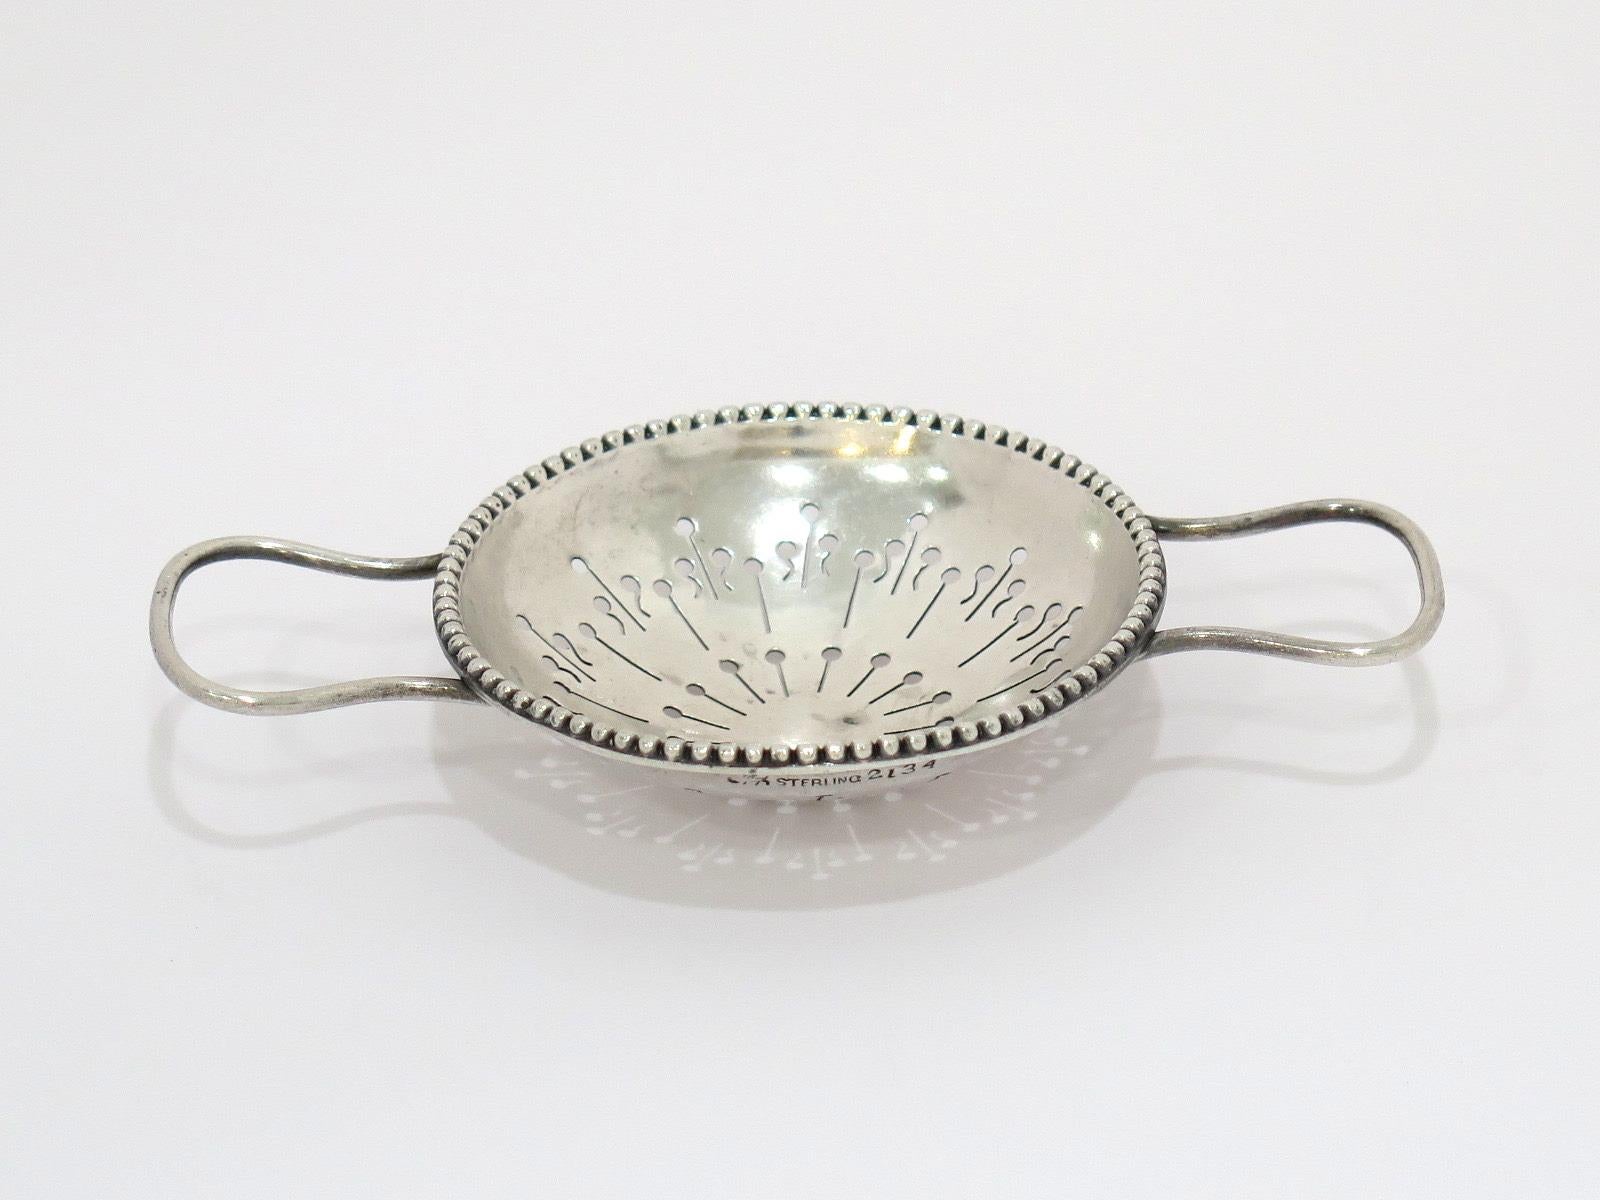 American Sterling Silver Whiting Antique Tea Infuser